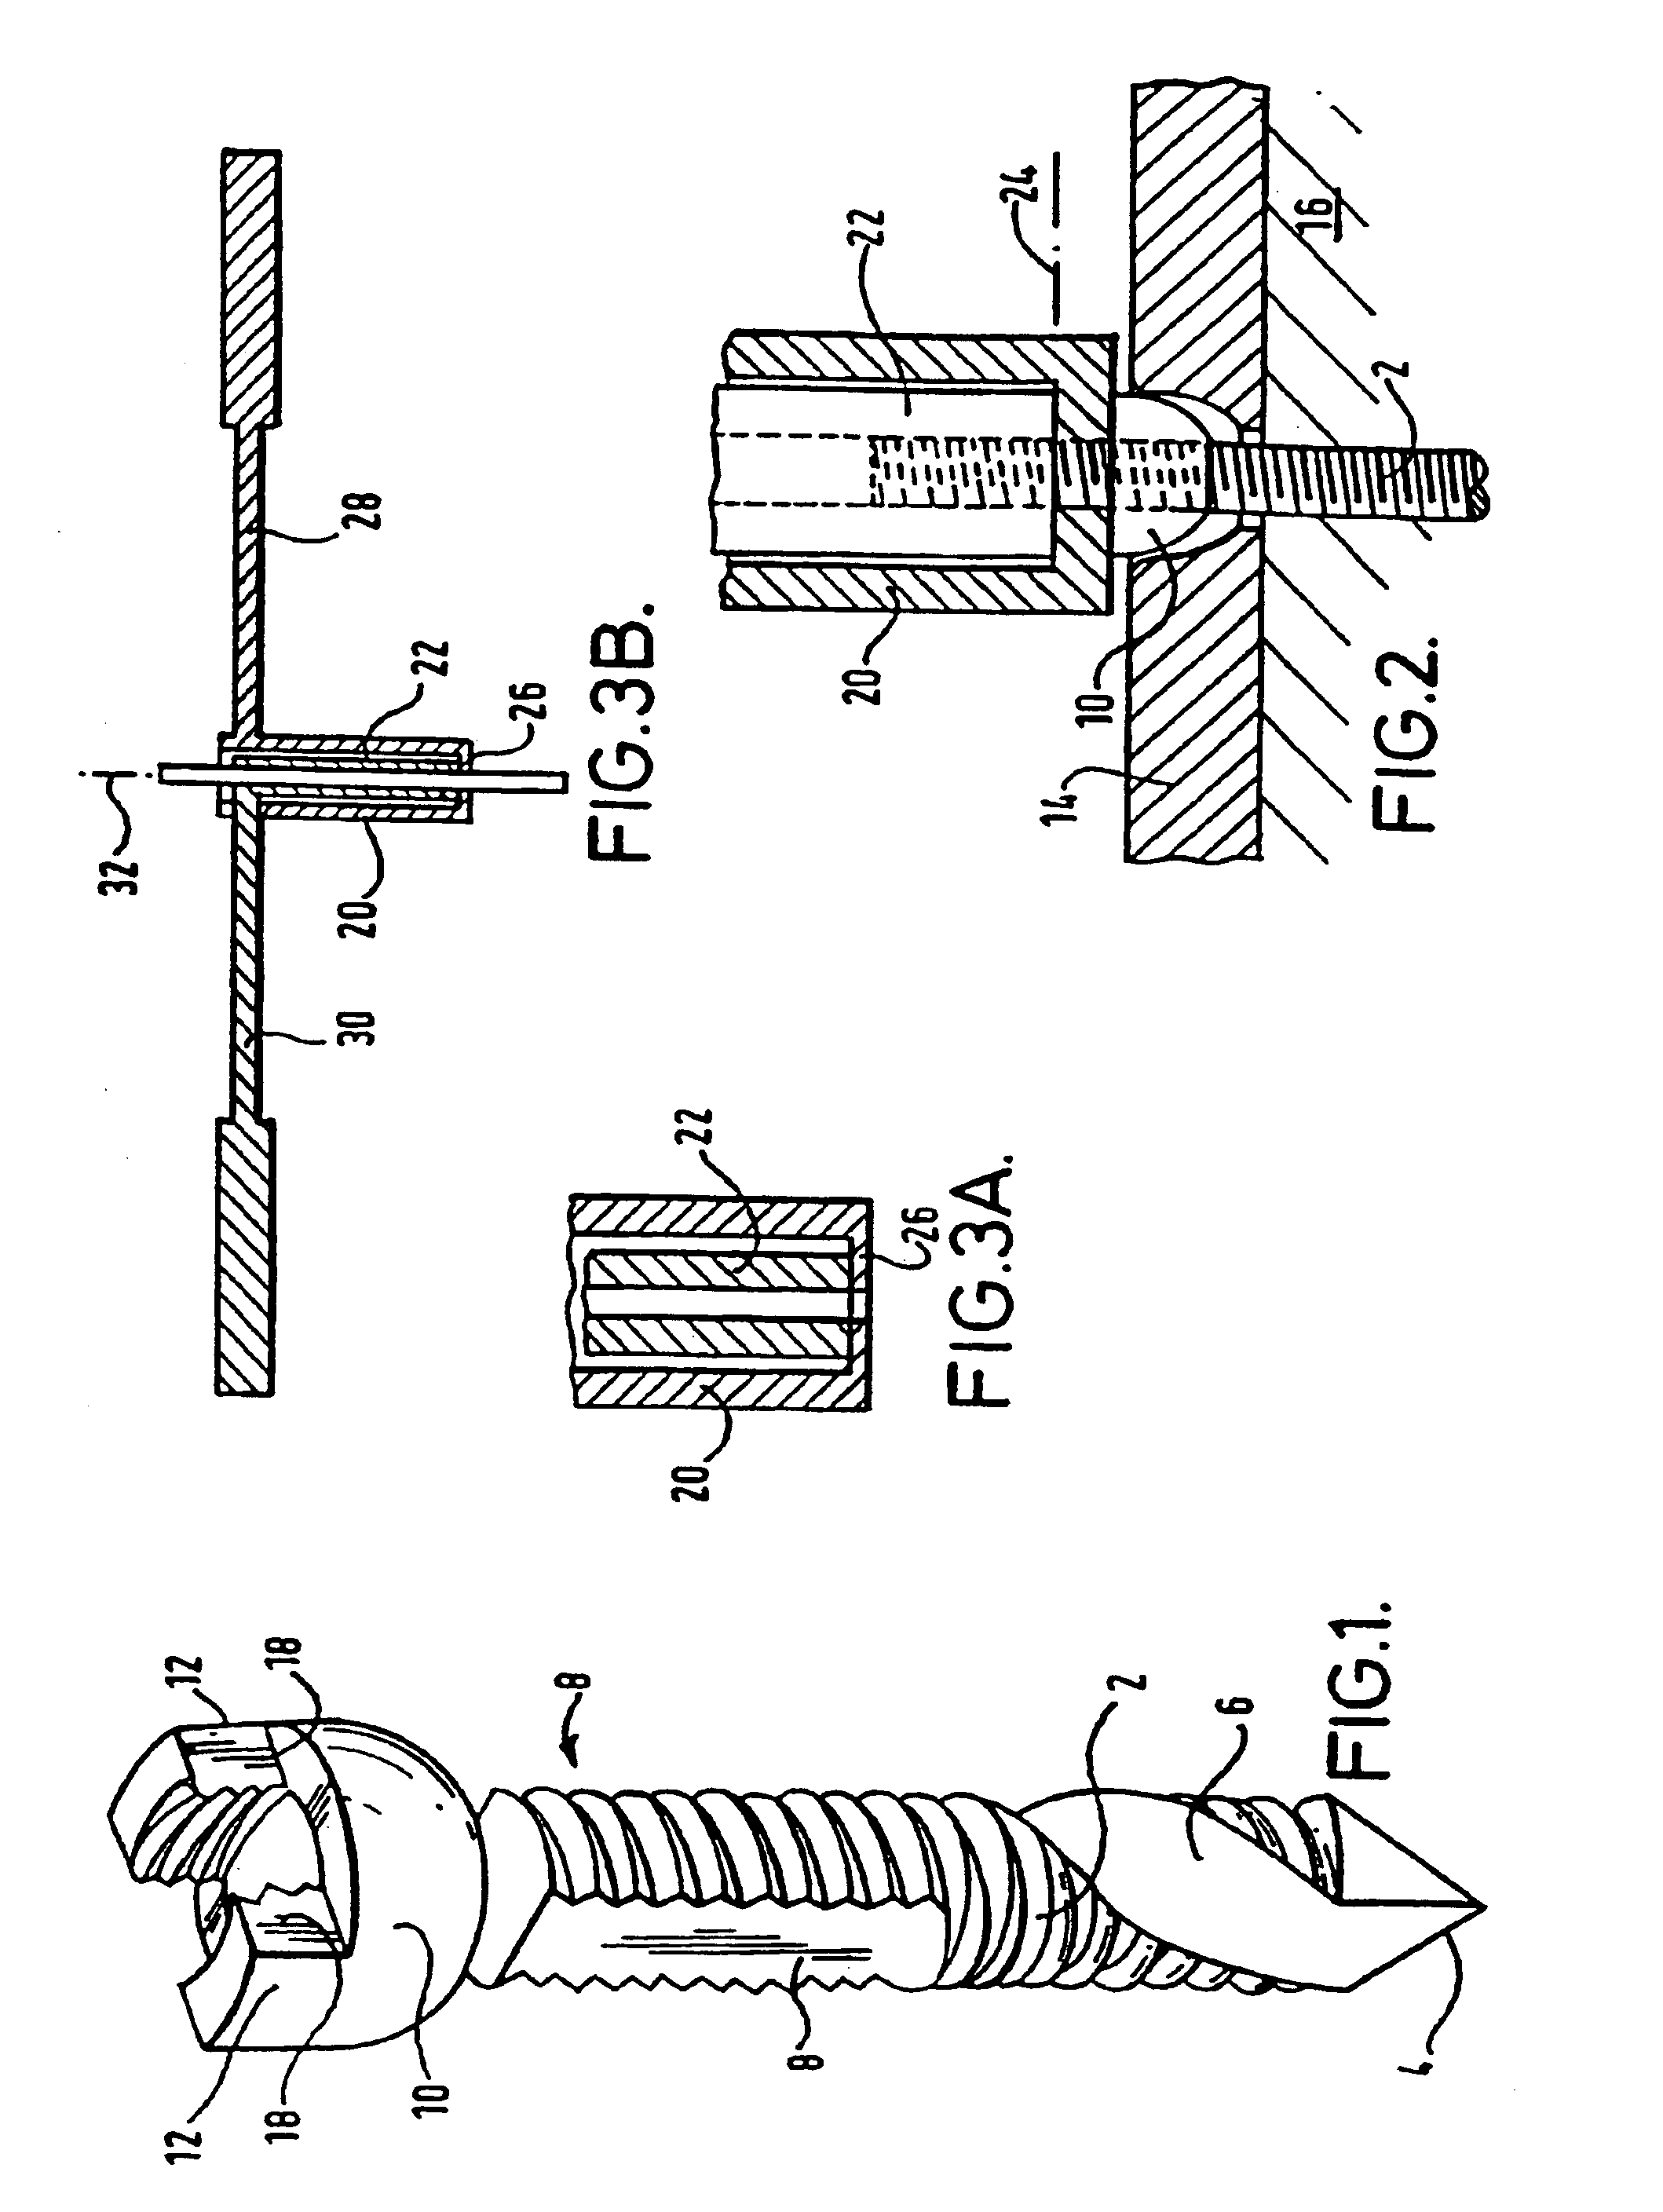 Tool for shearing bolts